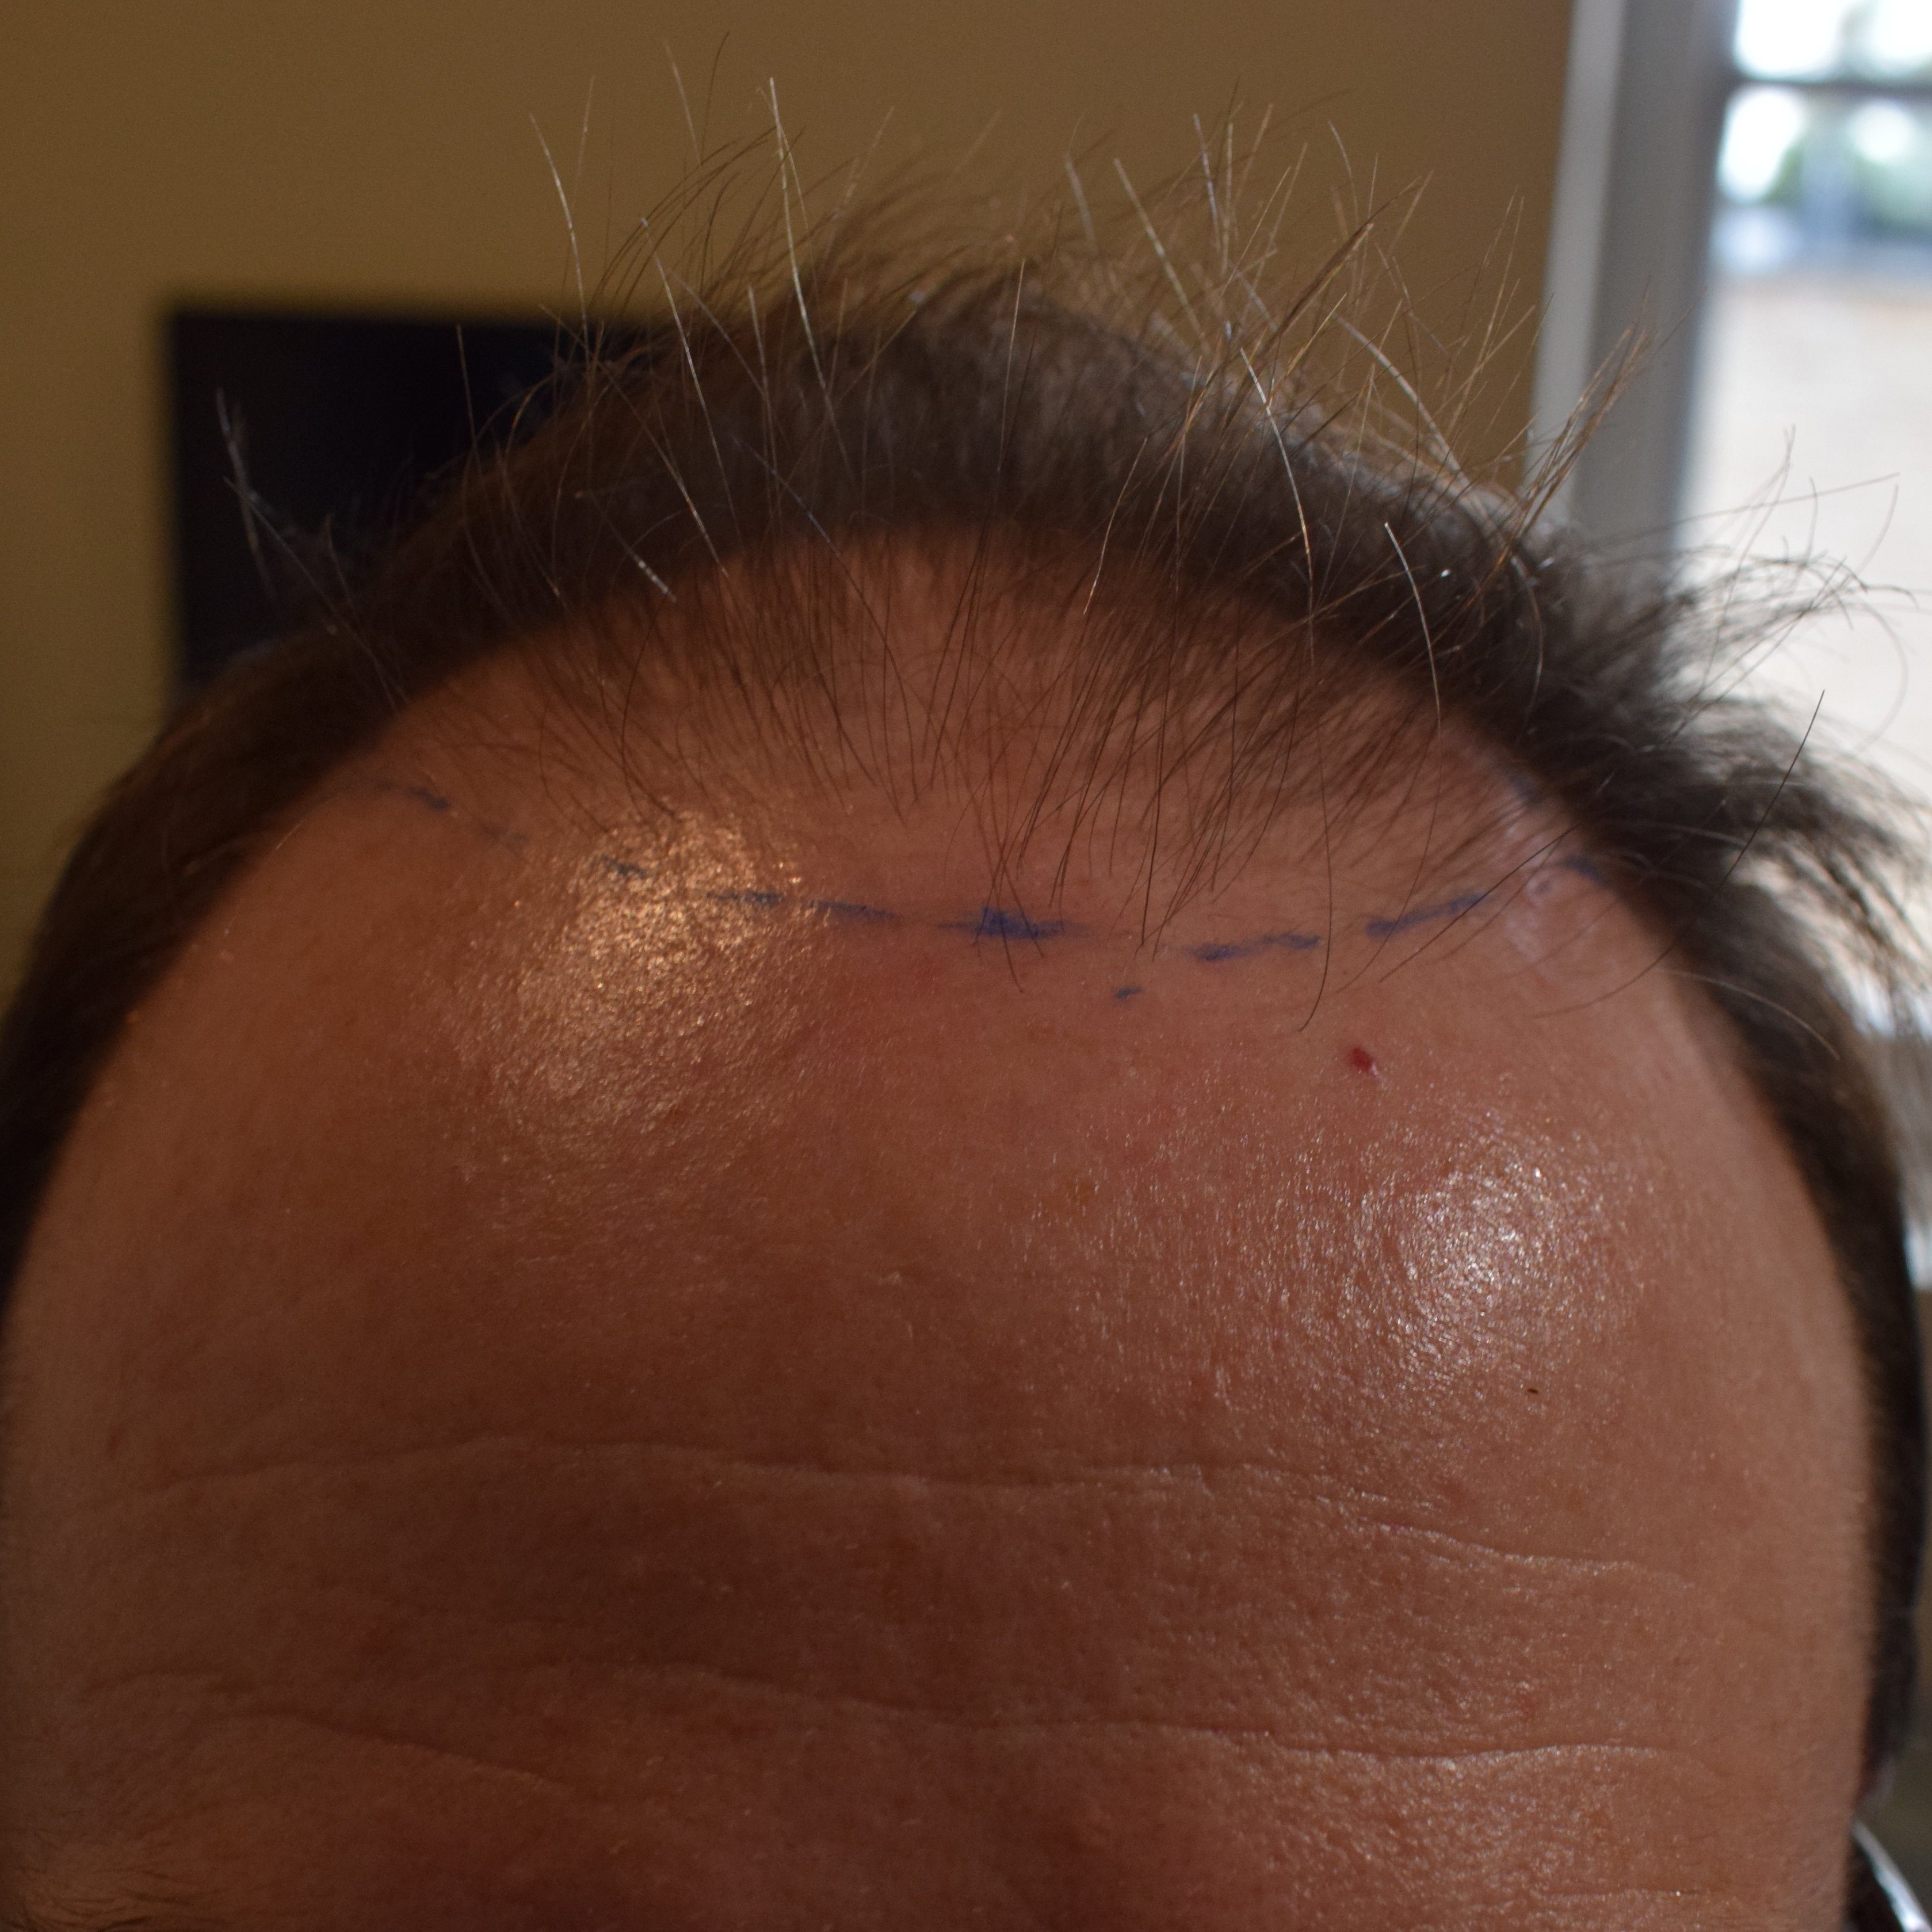 Hair Transplant After 1 Month: Photos, Results, Side Effects